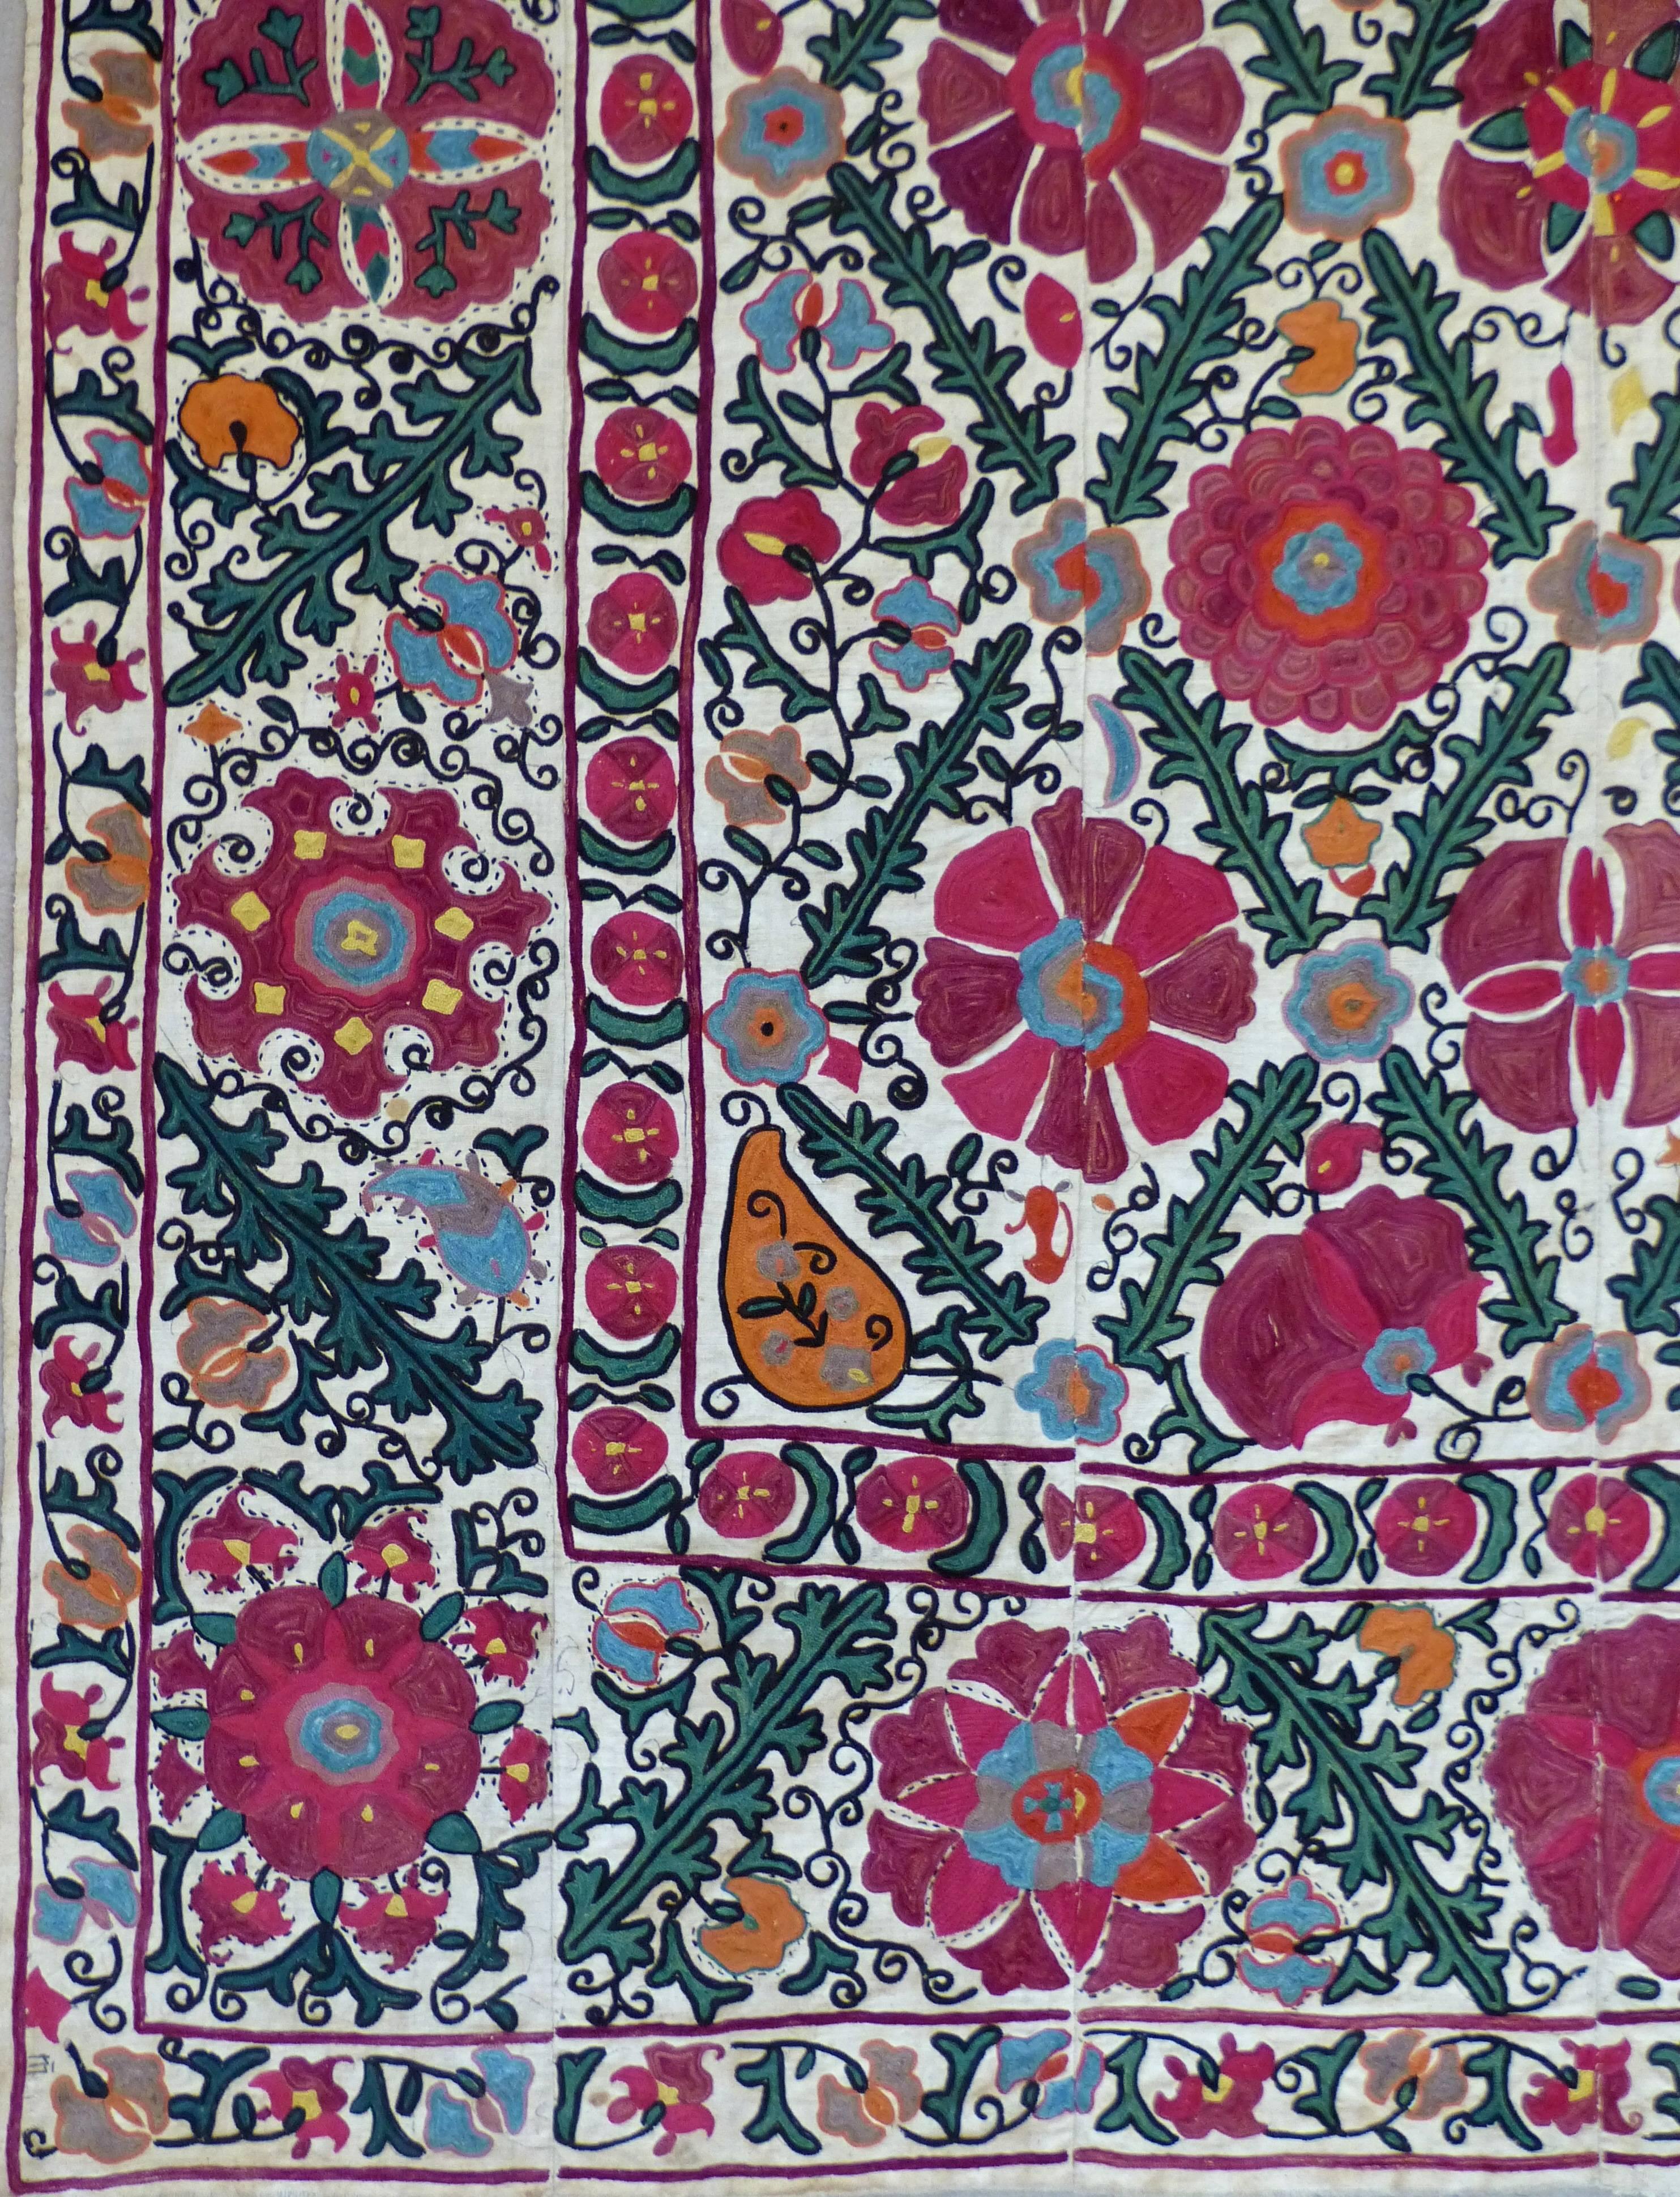 Uzbek Suzani Antique Embroidery from Central Asia